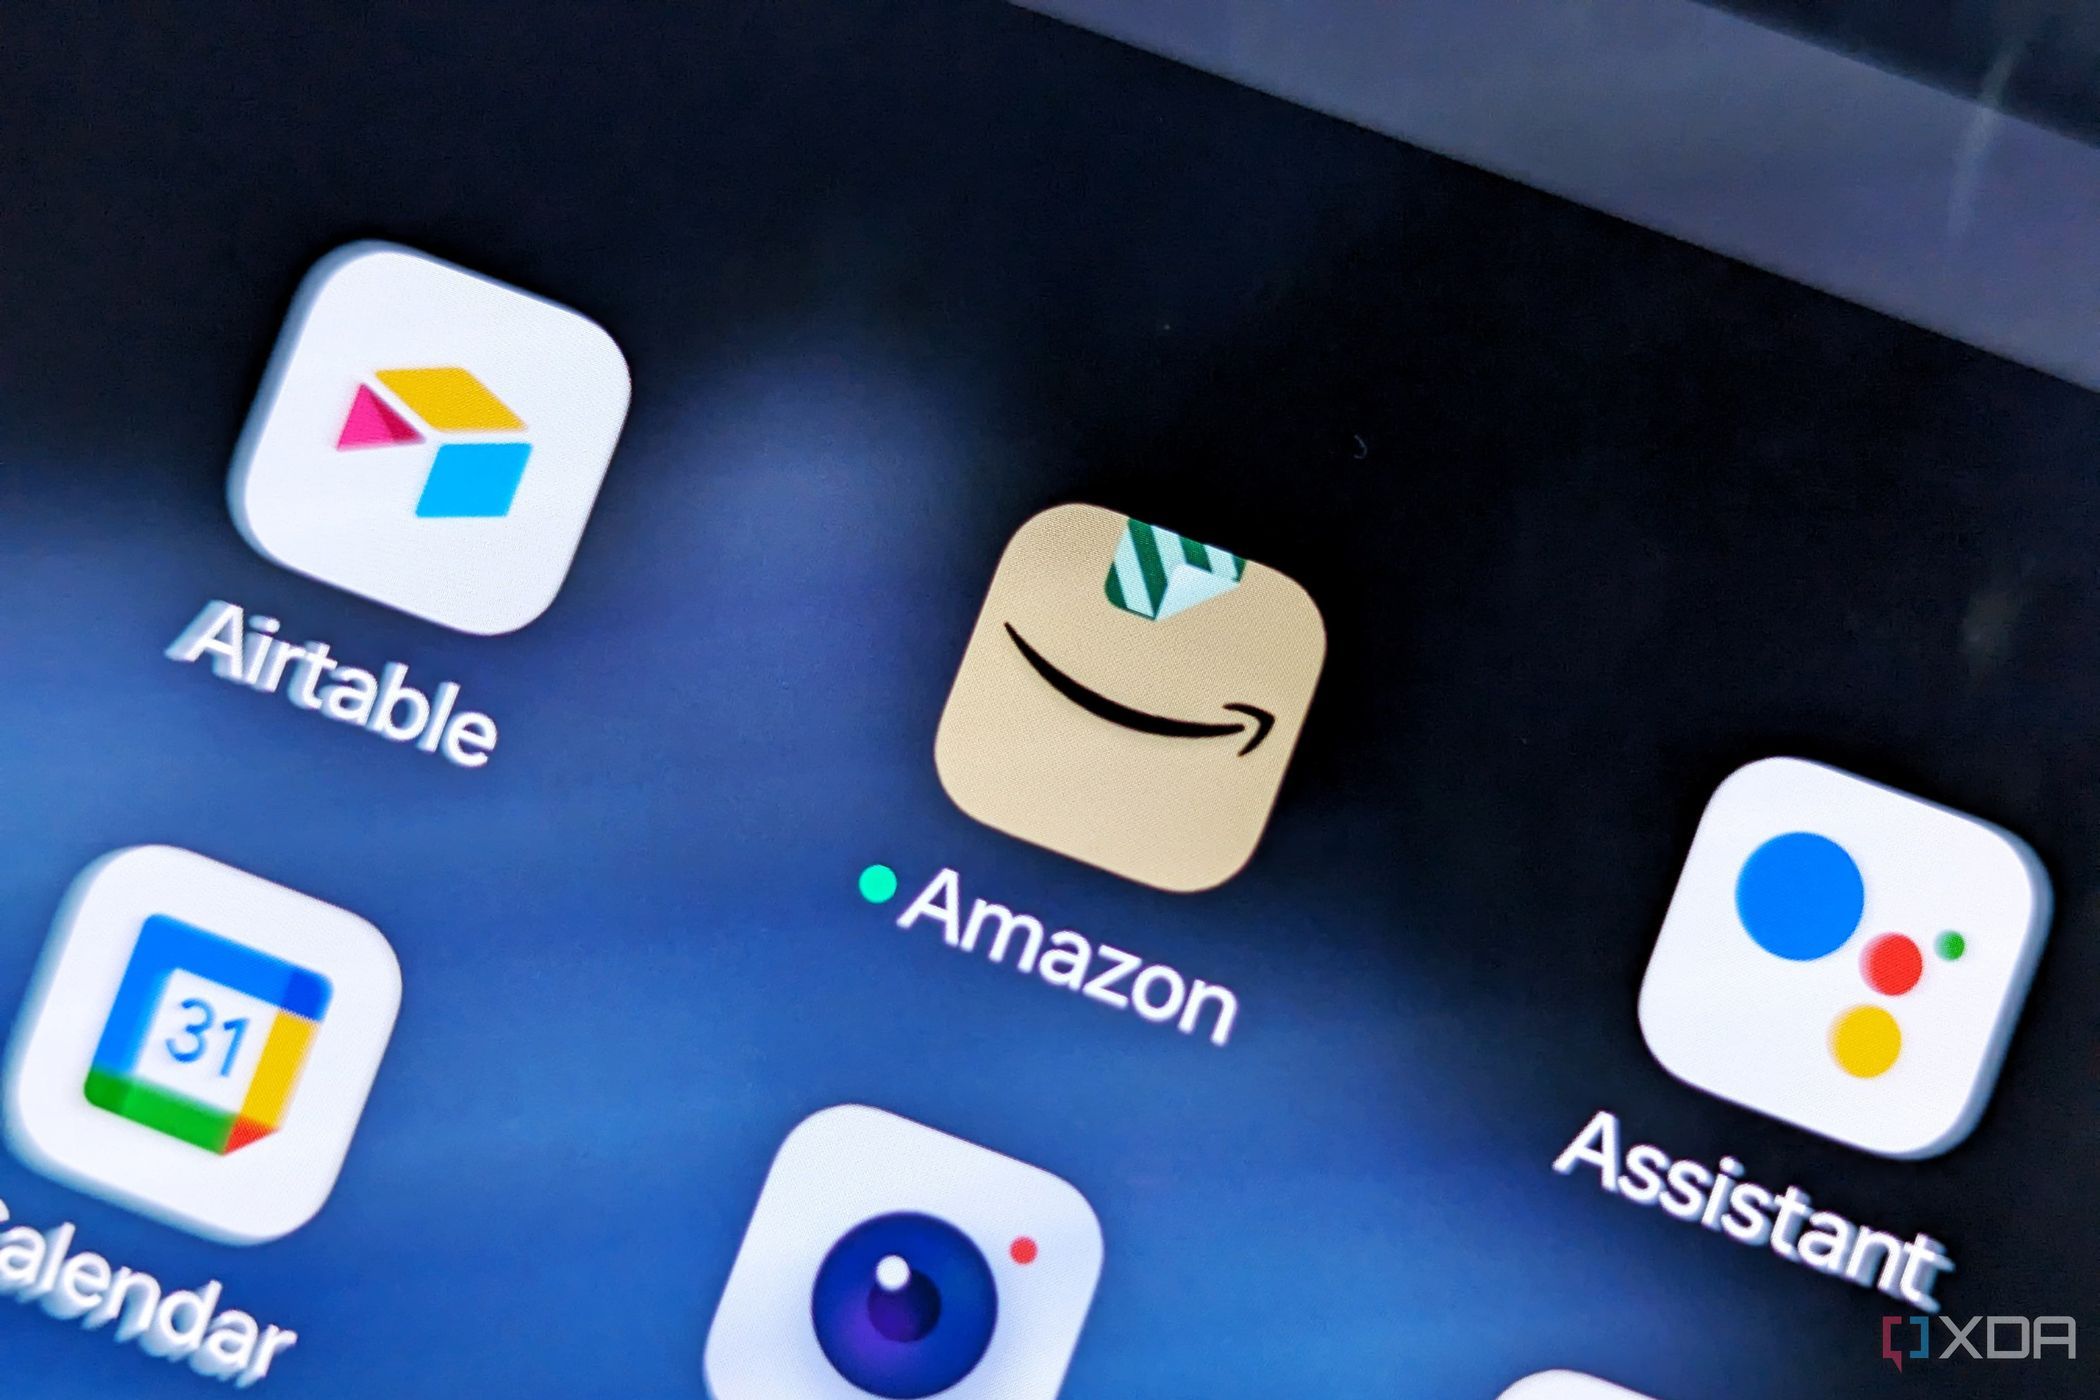 An image showing the Amazon app on a phone.